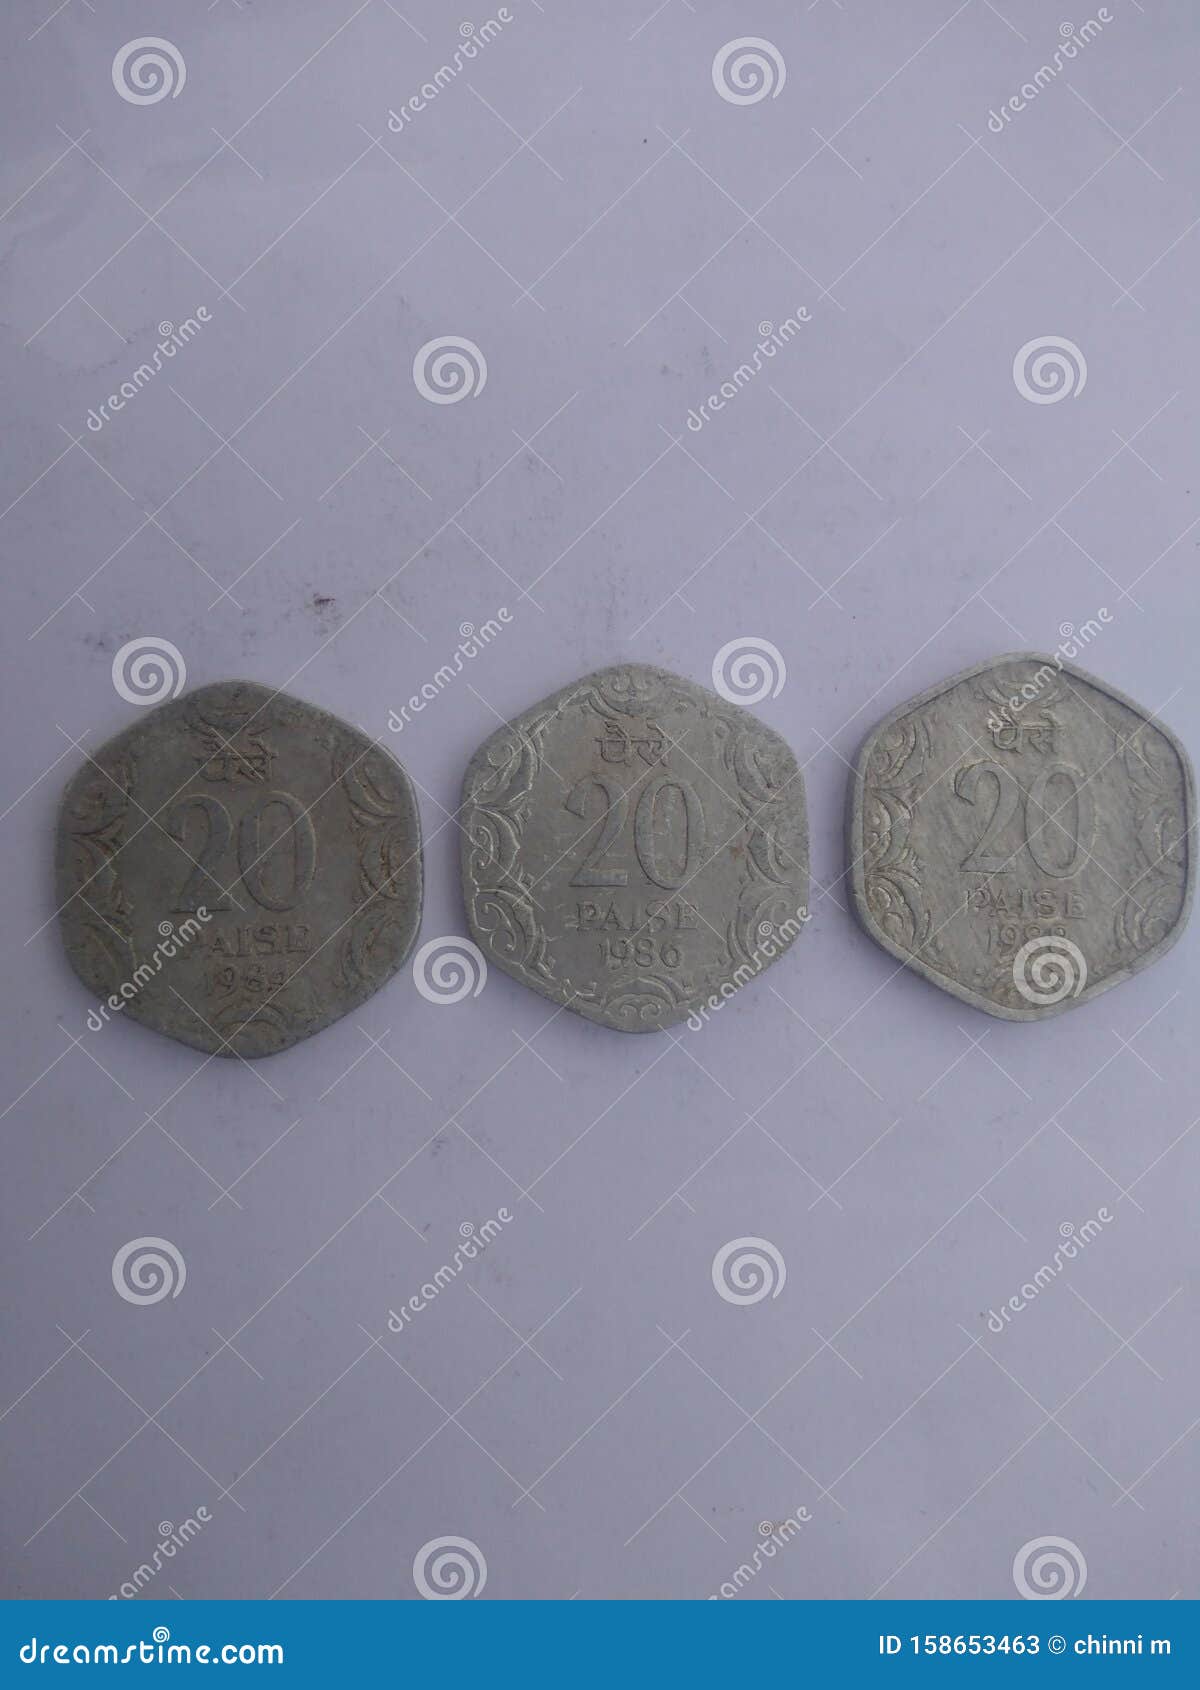 old indian coin for twety paises with different years